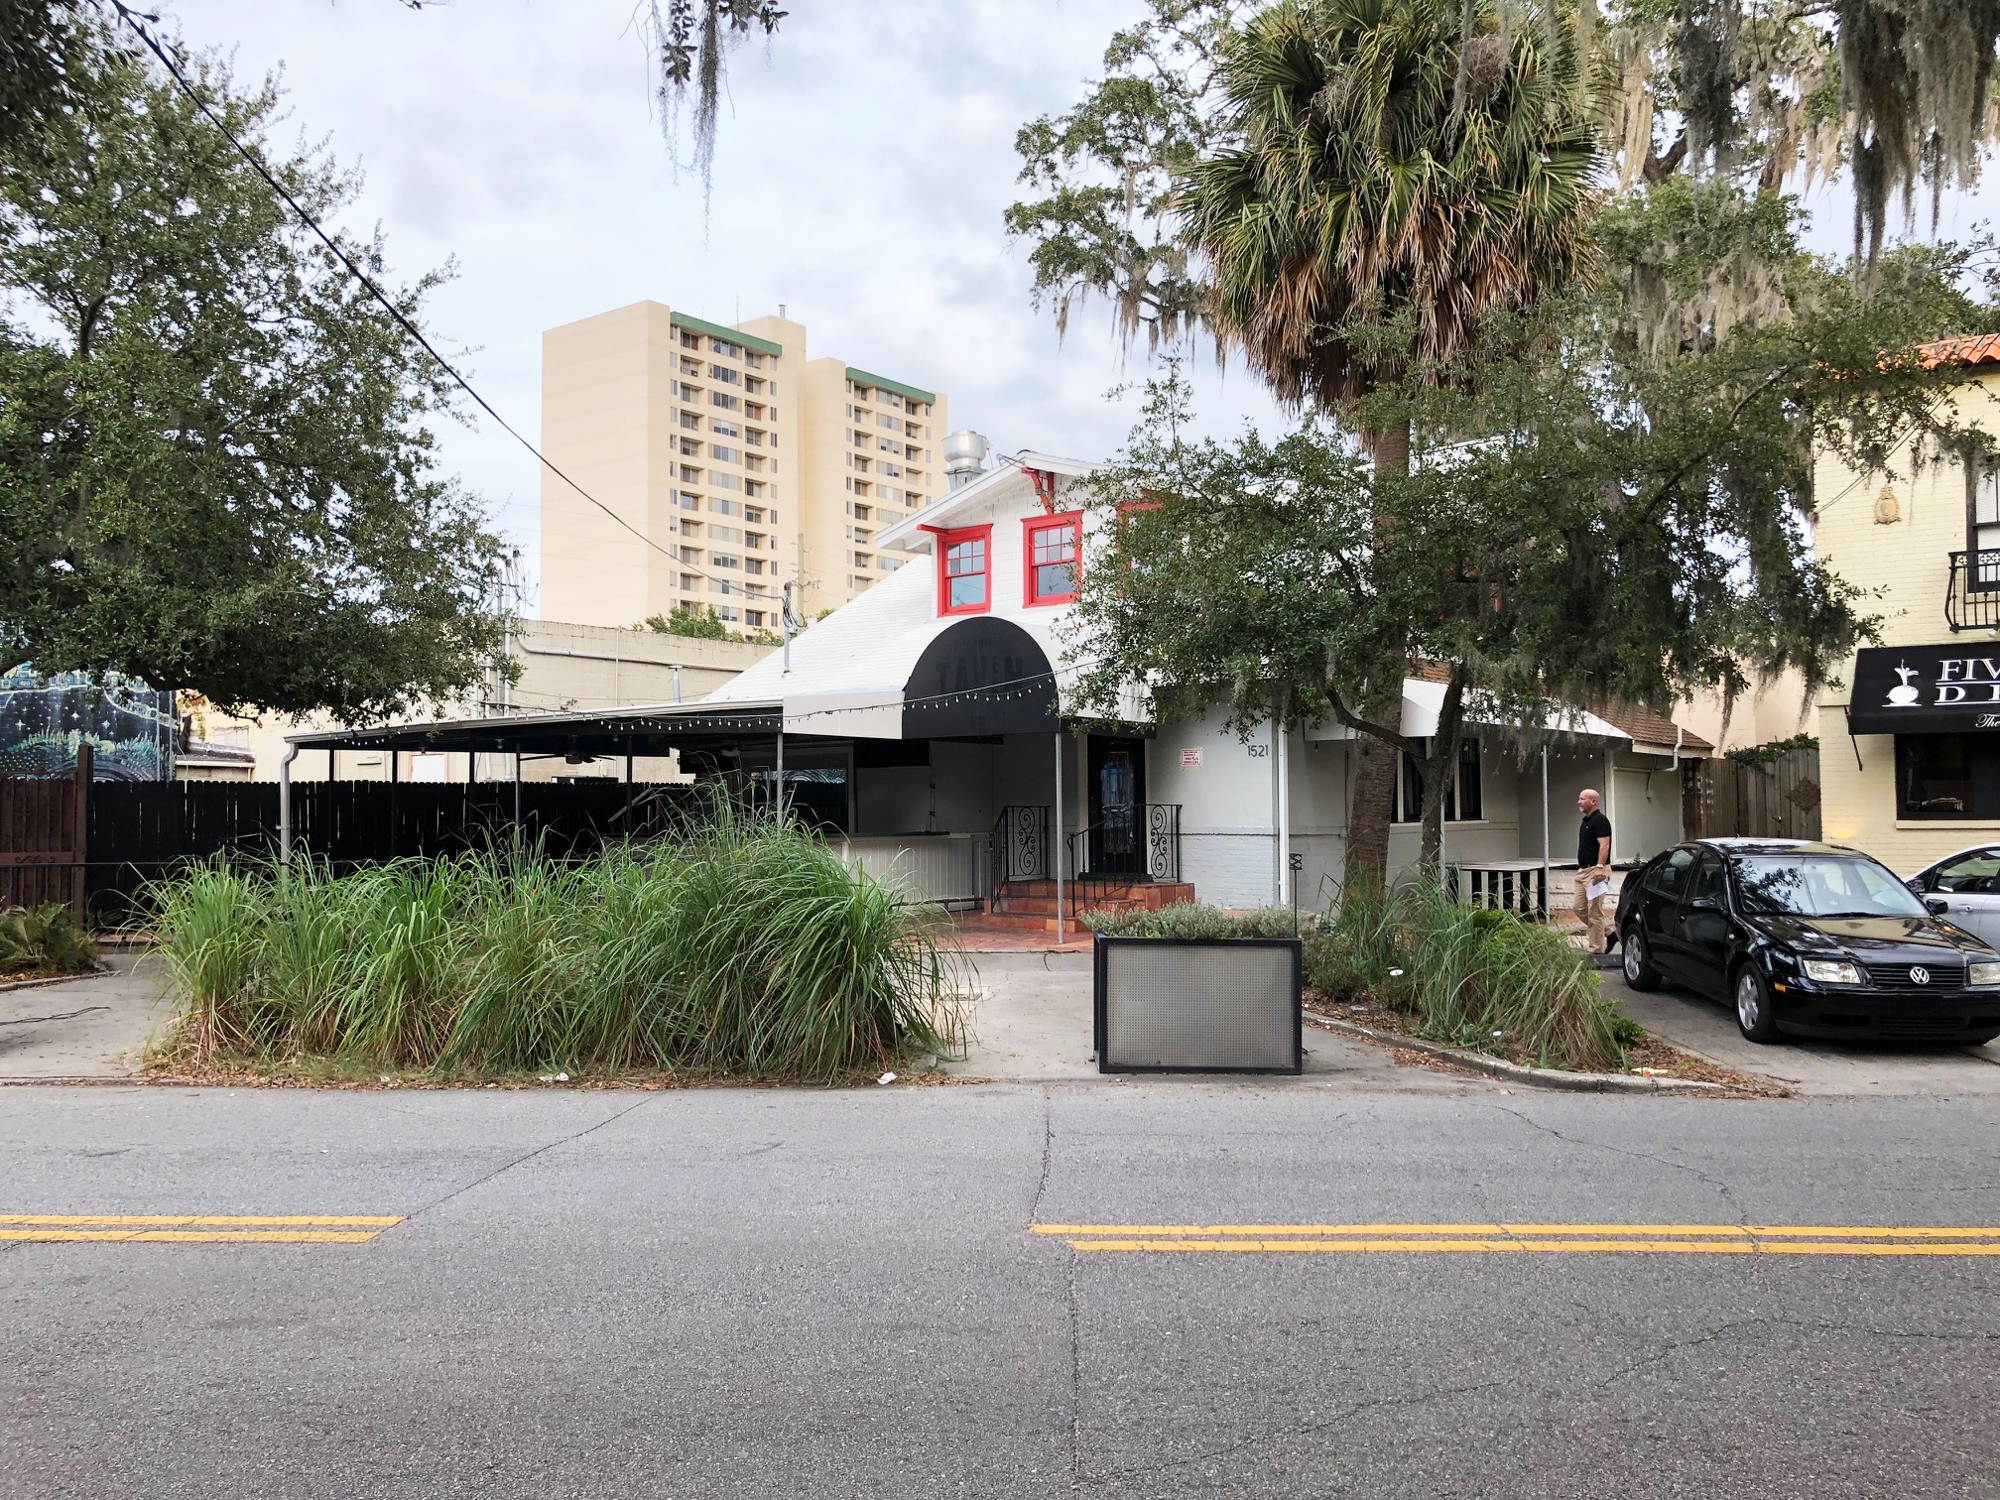 Prospect Five Points is planned for 1521 Margaret St. It’s the former Safe Harbor Seafood and Marah Brewing space that previously was the home of Five Points Tavern and O’Brothers Irish Pub.